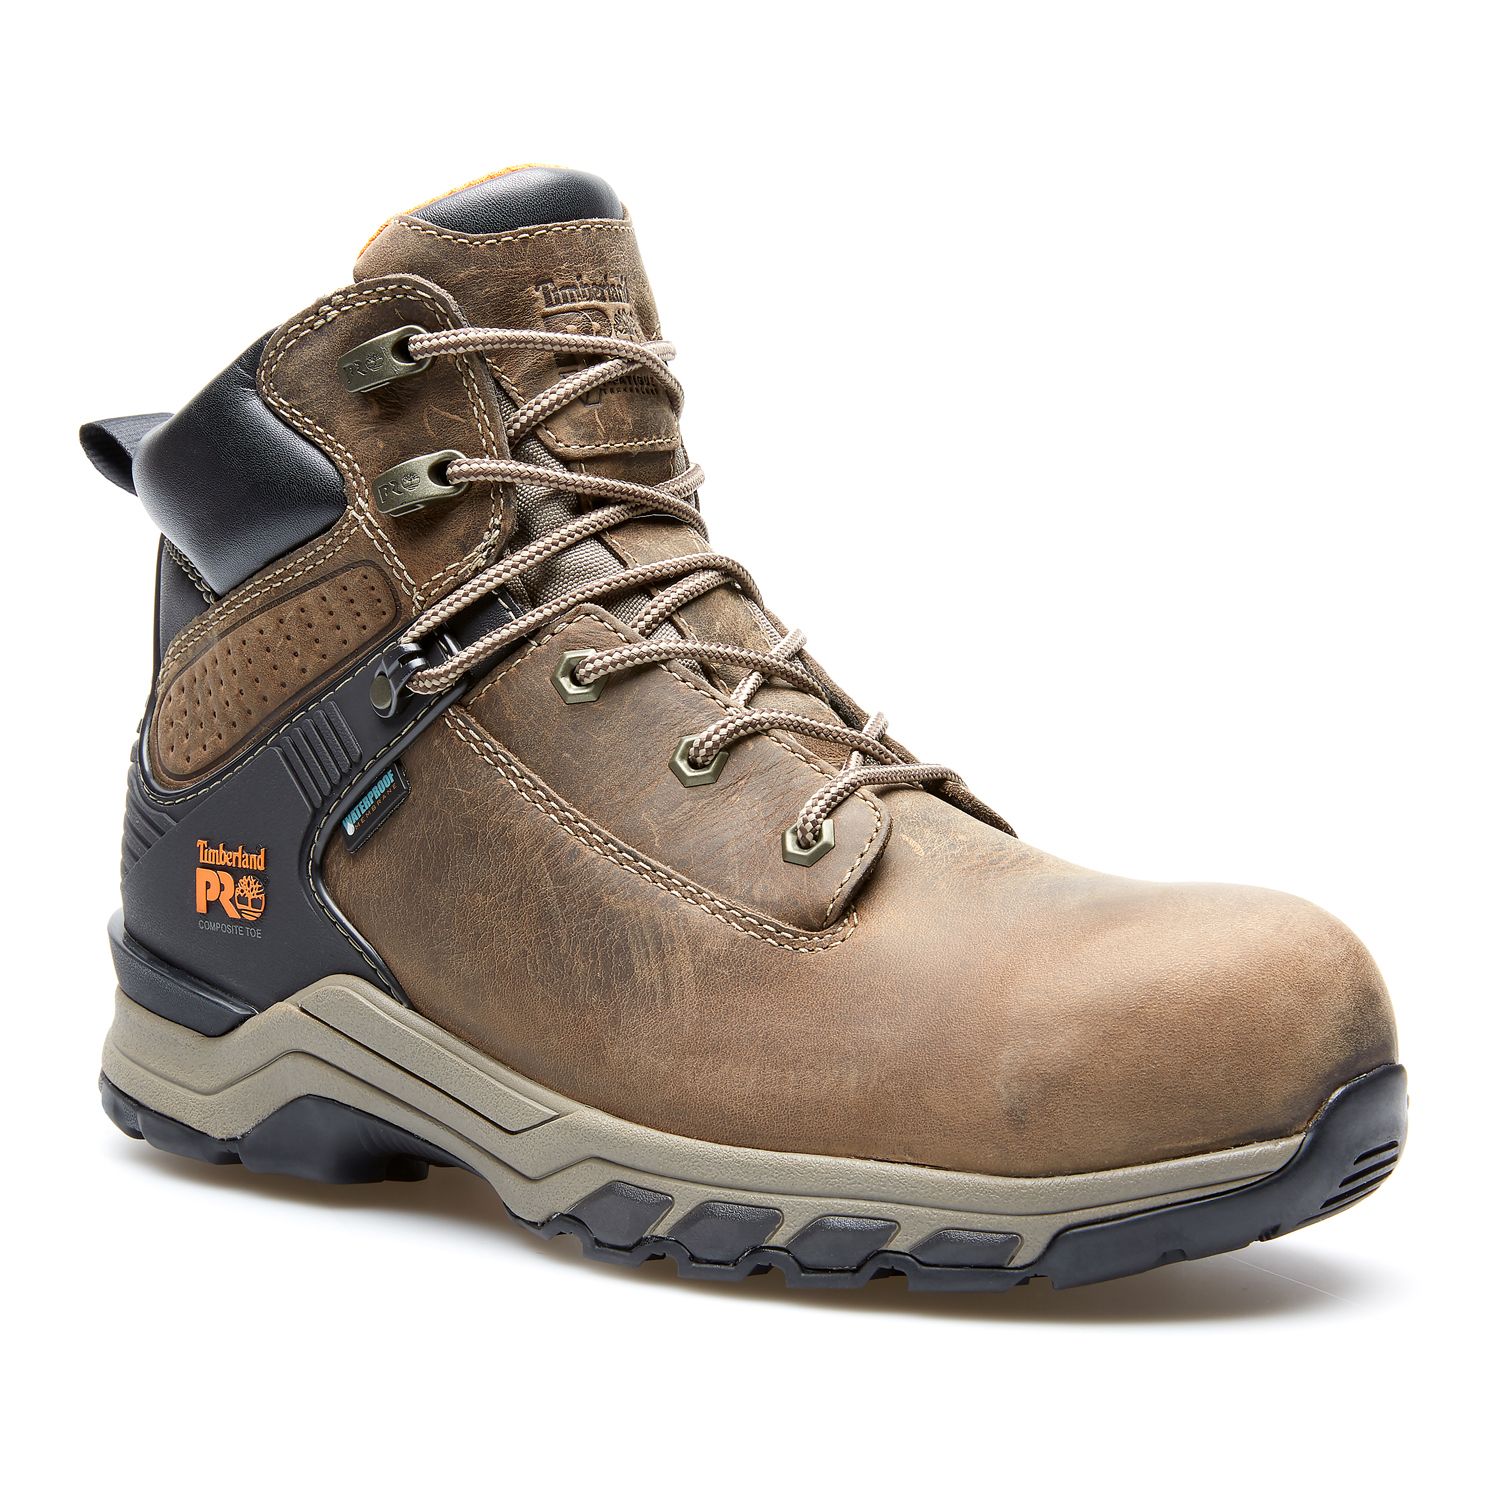 timberland pro hypercharge review